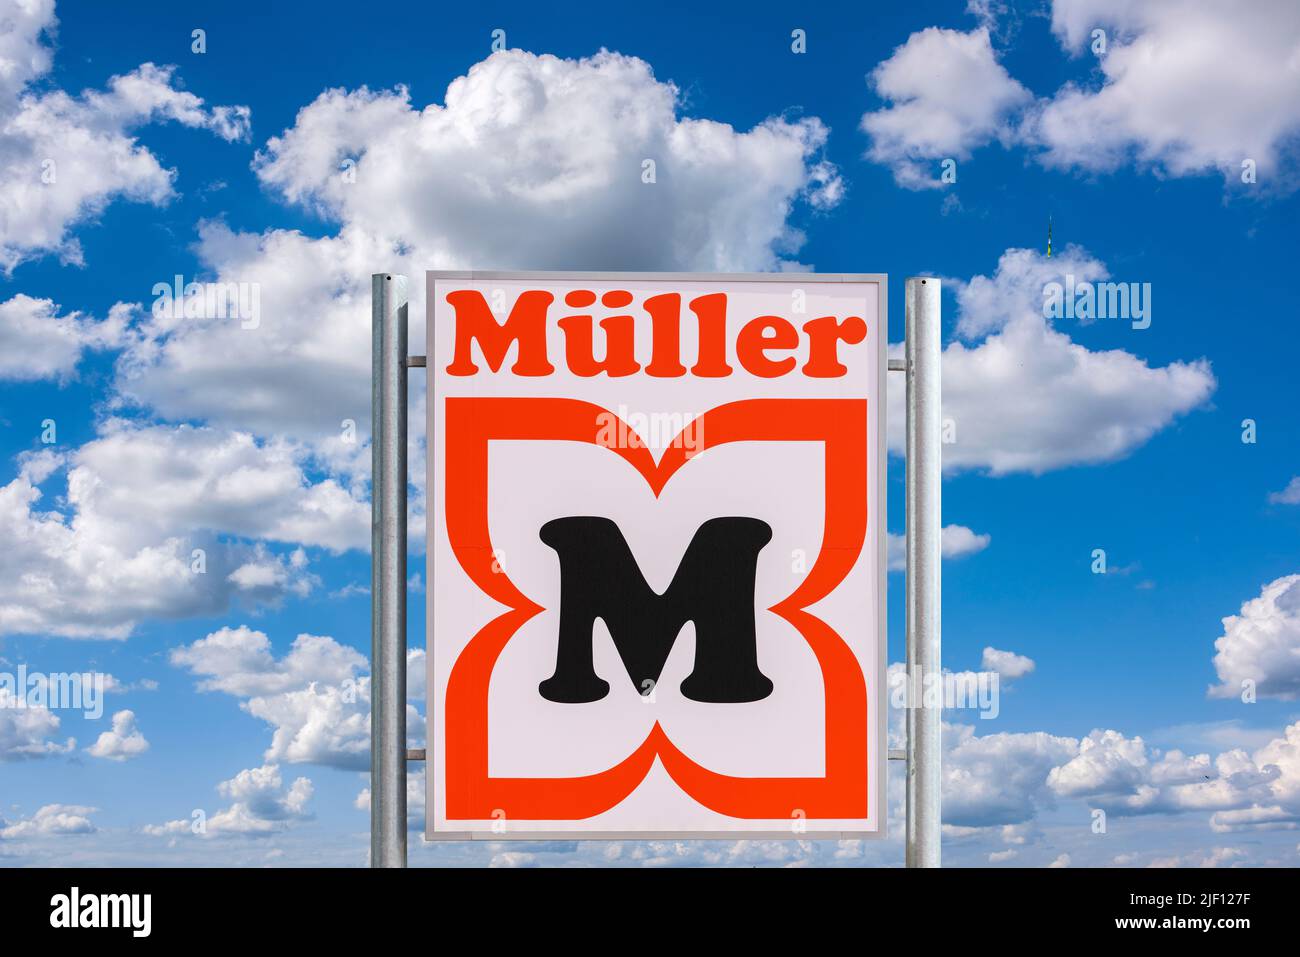 AUGSBURG, GERMANY – JUNE 16, 2022: Advertising sign of the drugstore Müller in front of a sky with clouds Stock Photo